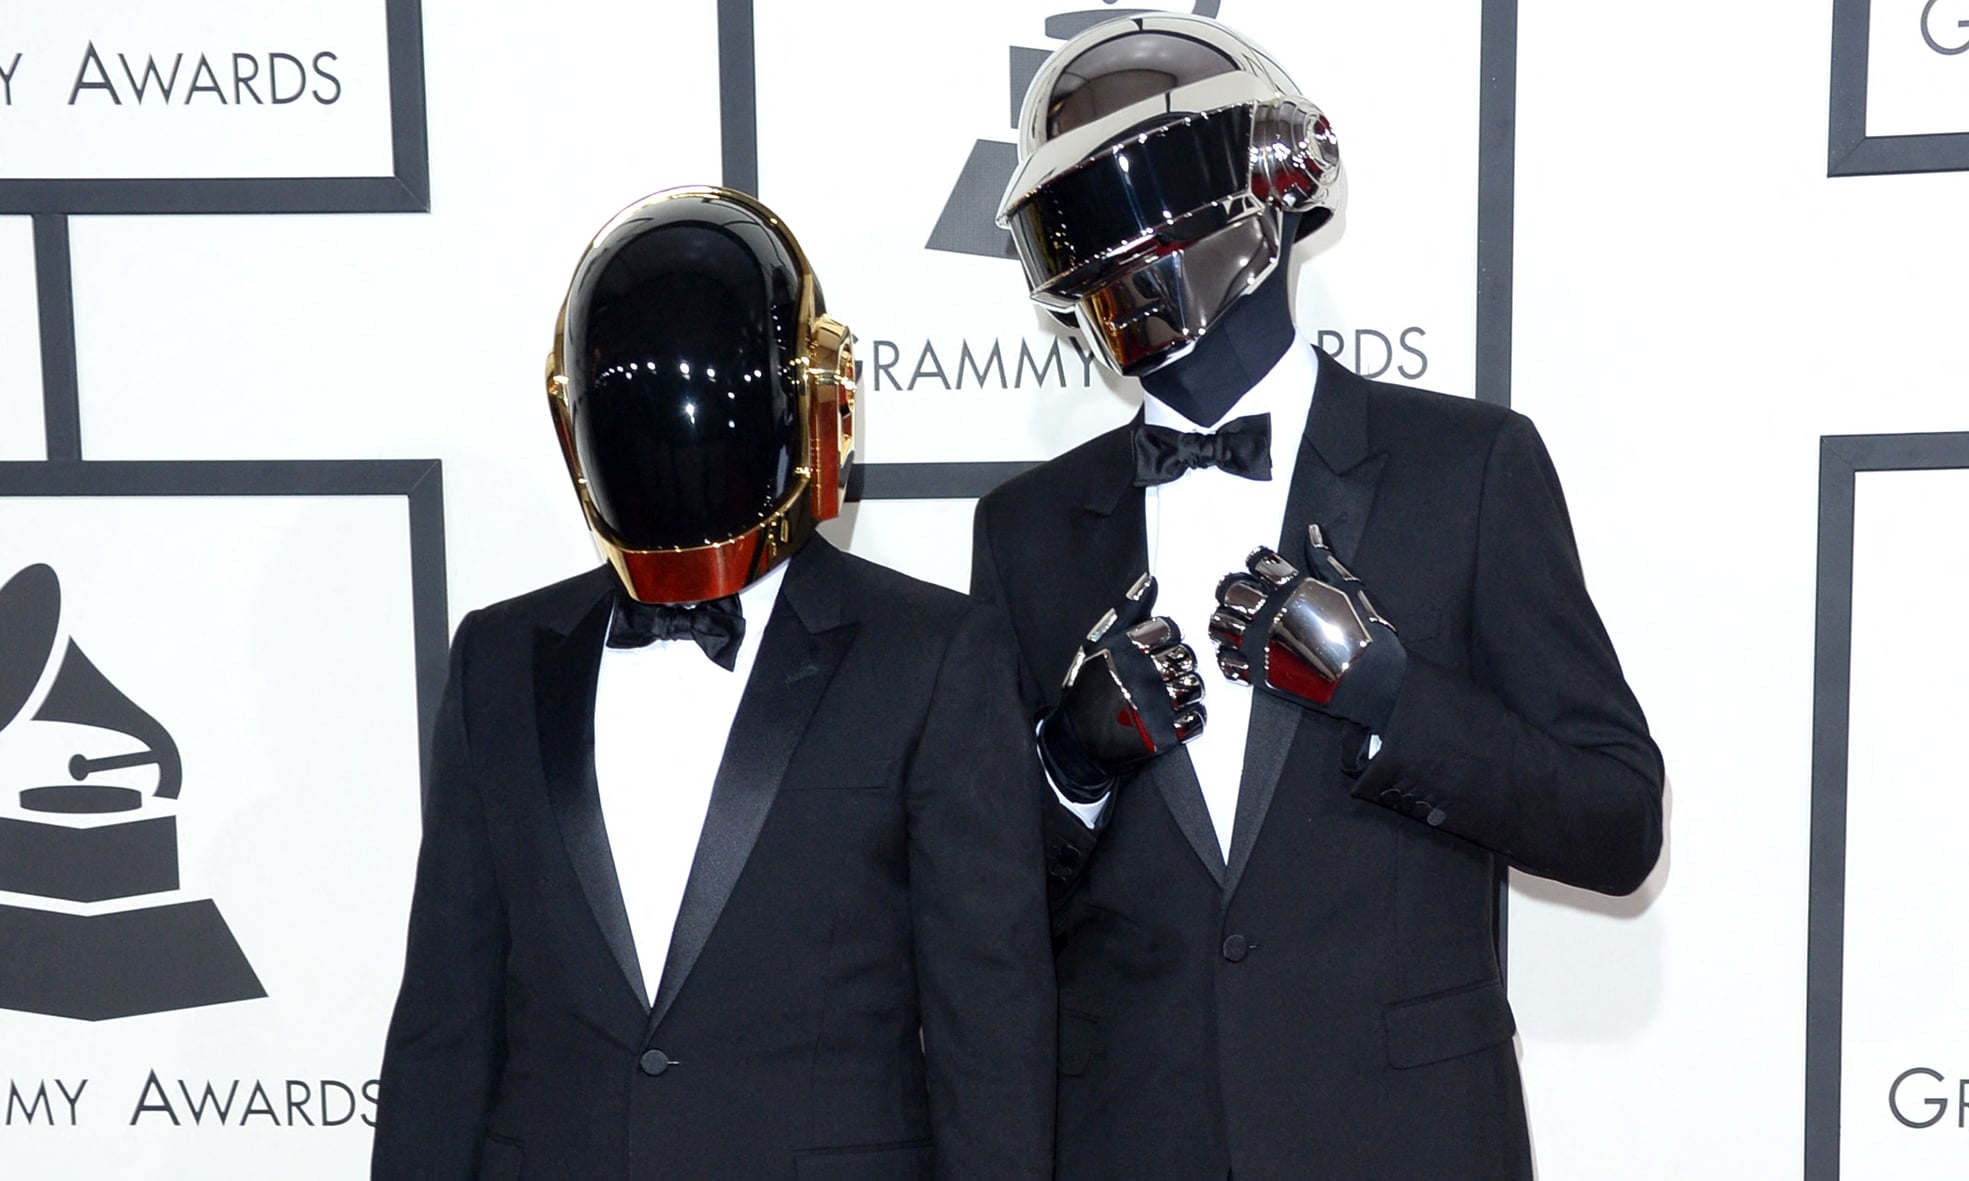 Recording artists Guy-Manuel de Homem-Christo (left) and Thomas Bangalter of Daft Punk attend the 56th GRAMMY Awards at Staples Center in Los Angeles, California--AFP